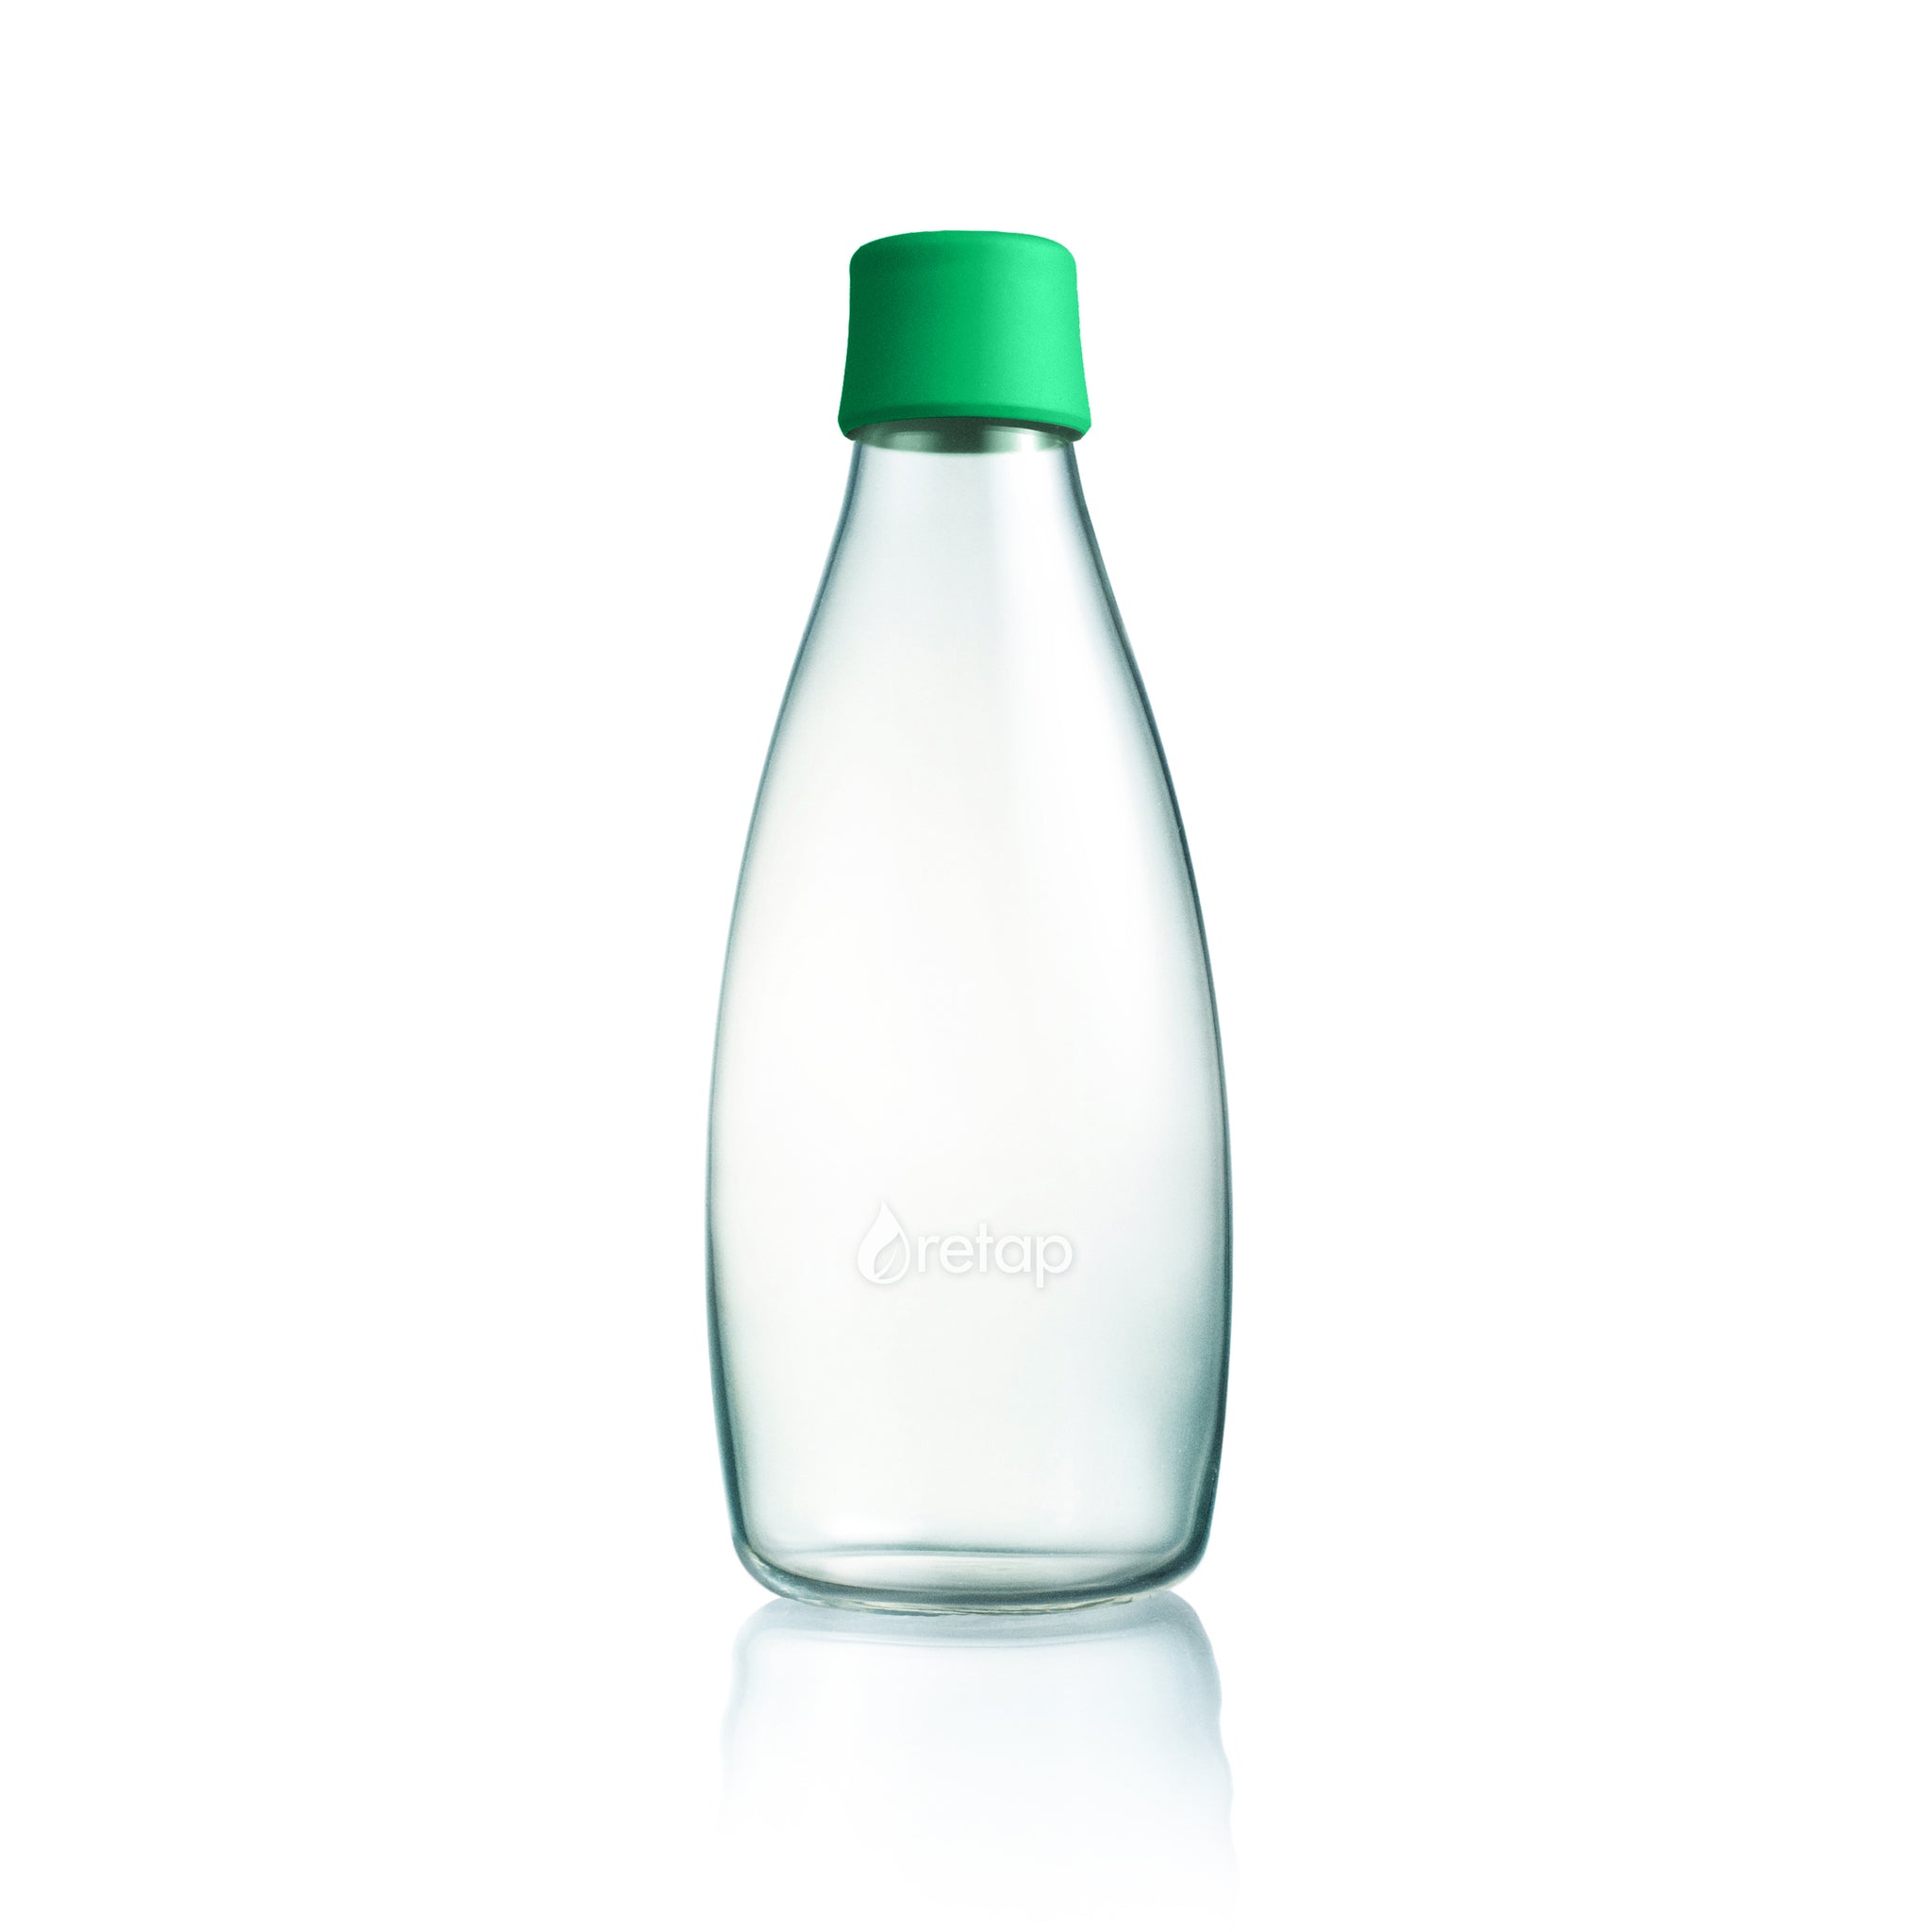 EYE ON THE ENVIRONMENT  Reusable glass bottles are gone, but